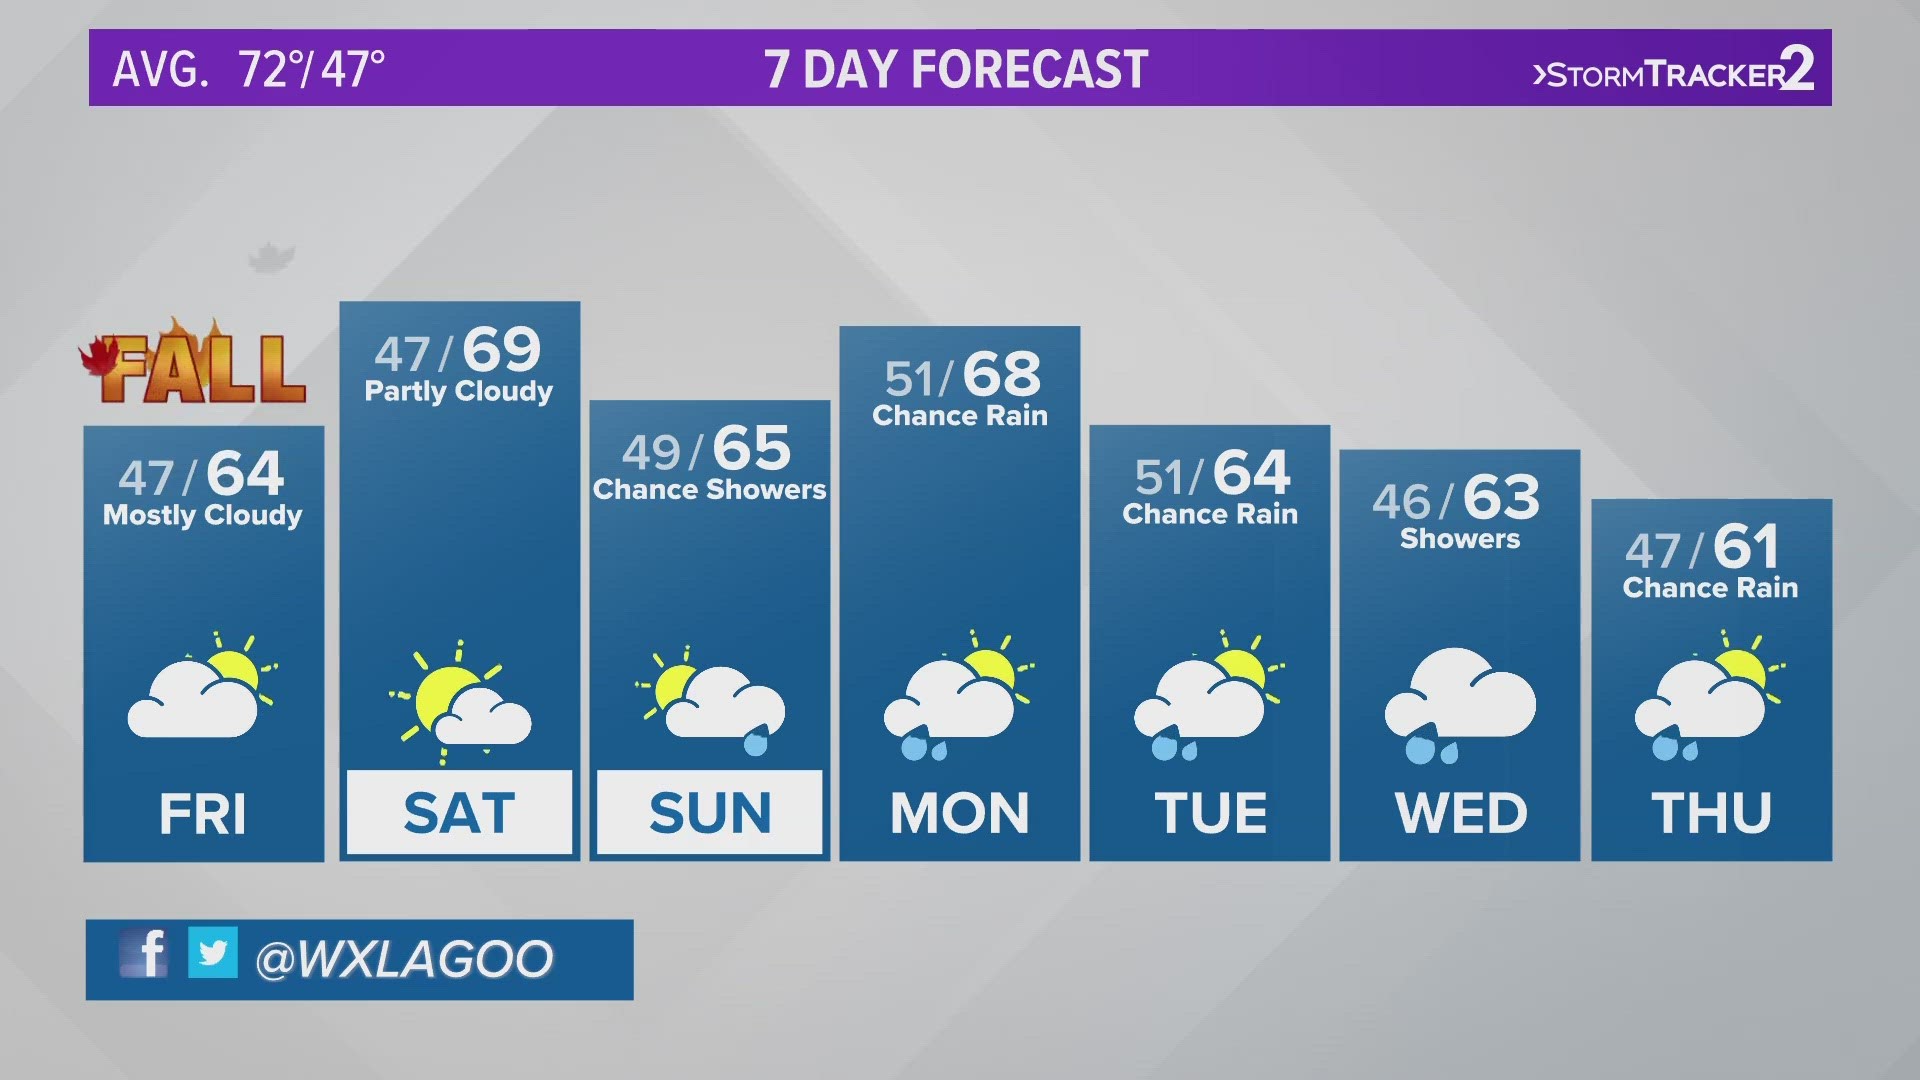 Friday and Saturday offer a little break from the rain before a cool, wet weather pattern moves back in.